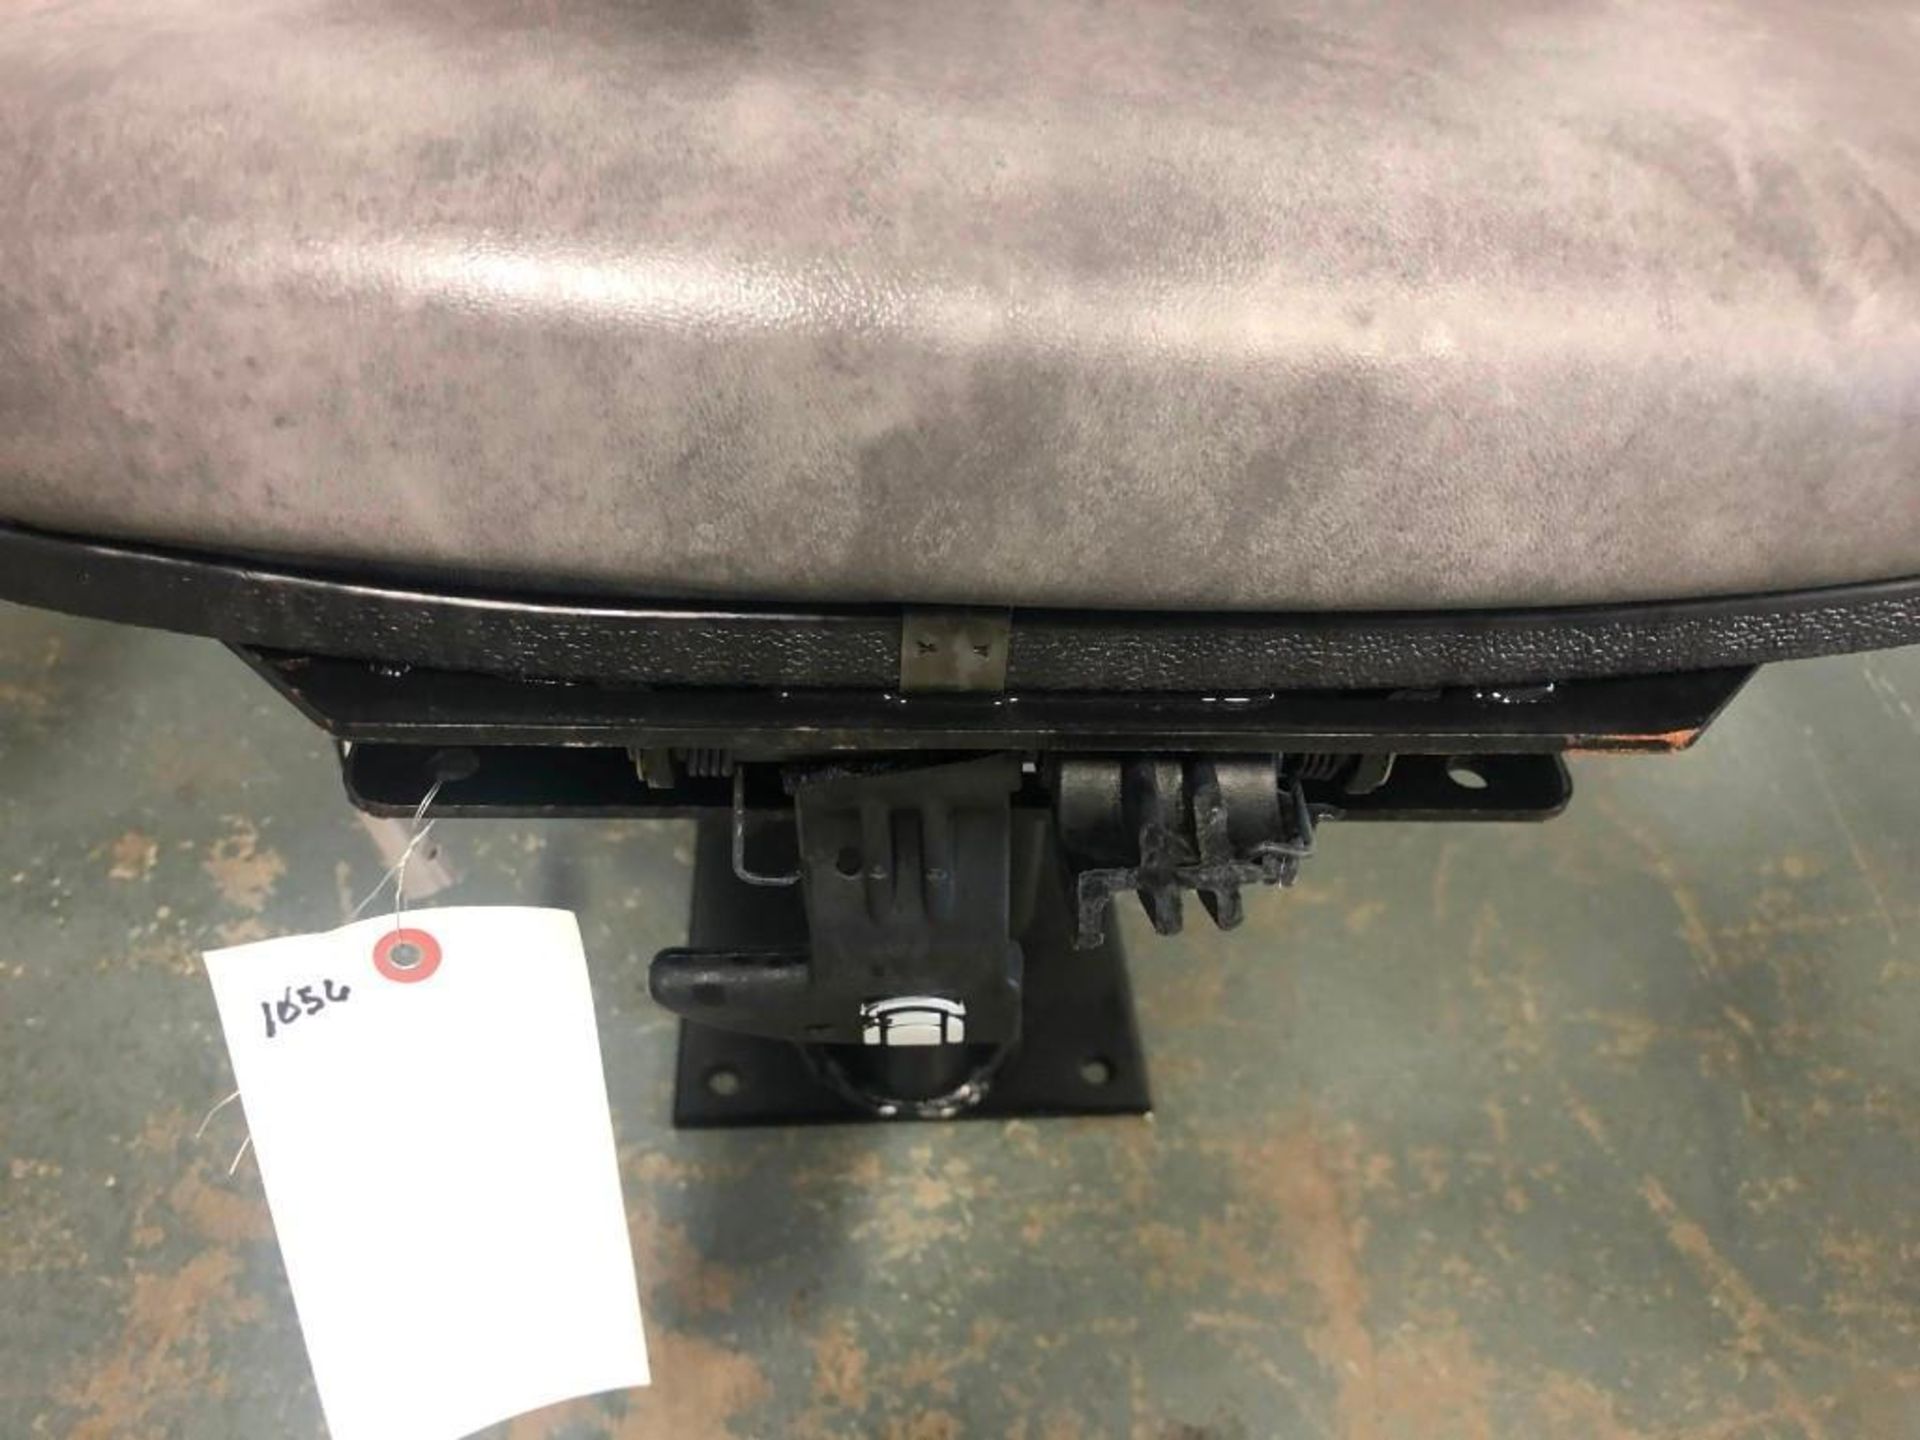 Case Backhoe Seat. Located at 301 E Henry Street, Mt. Pleasant, IA 52641. - Image 3 of 3